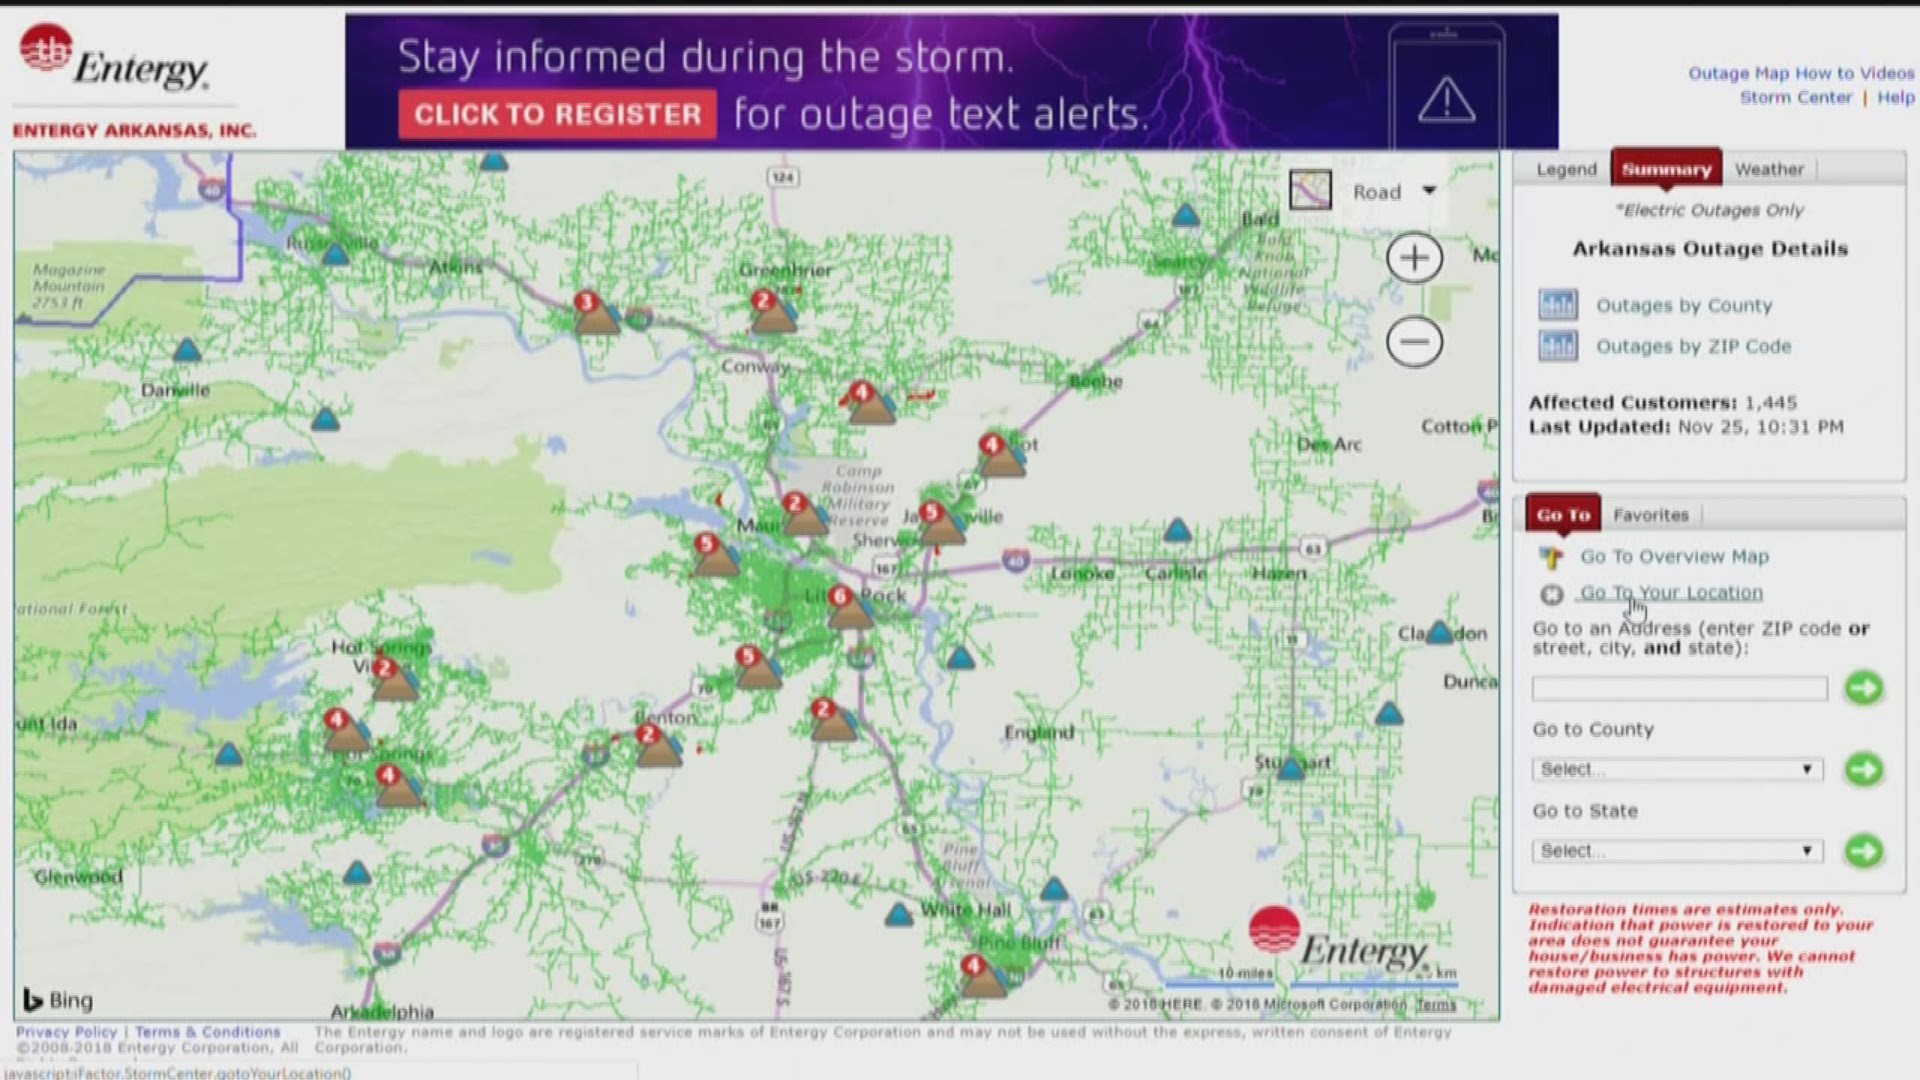 Those strong wind gusts have knocked power out for many Entergy customers here in Central Arkansas.